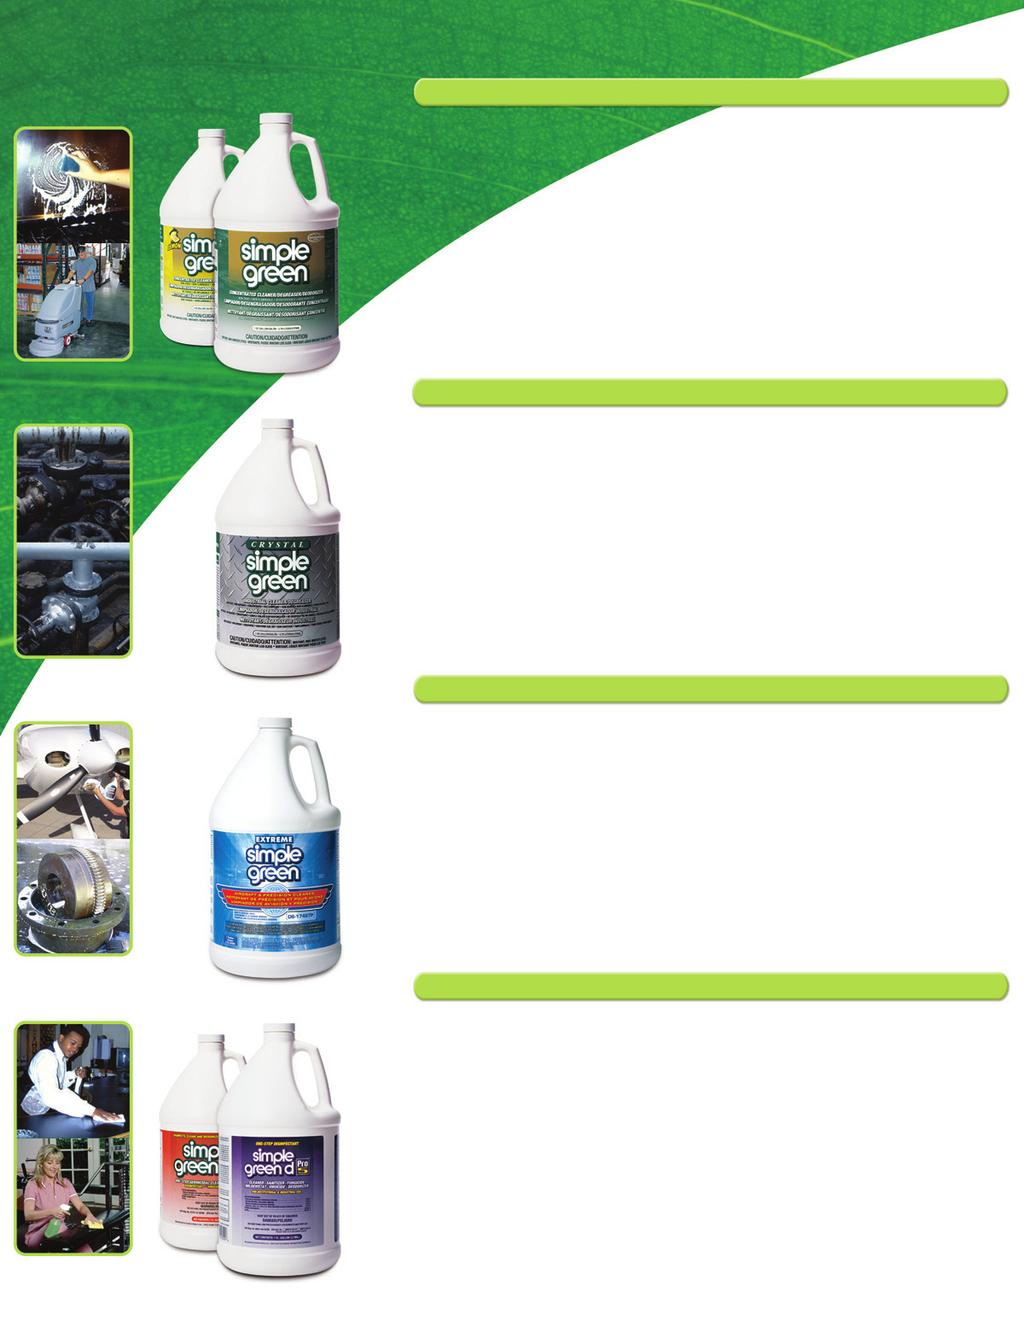 SIMPLE GREEN CONCENTRATED CLEANER DEODORIZER Non-toxic and biodegradable Non-abrasive and non-flammable A4, A8, and B2 USDA ratings Mild 9.3-9.